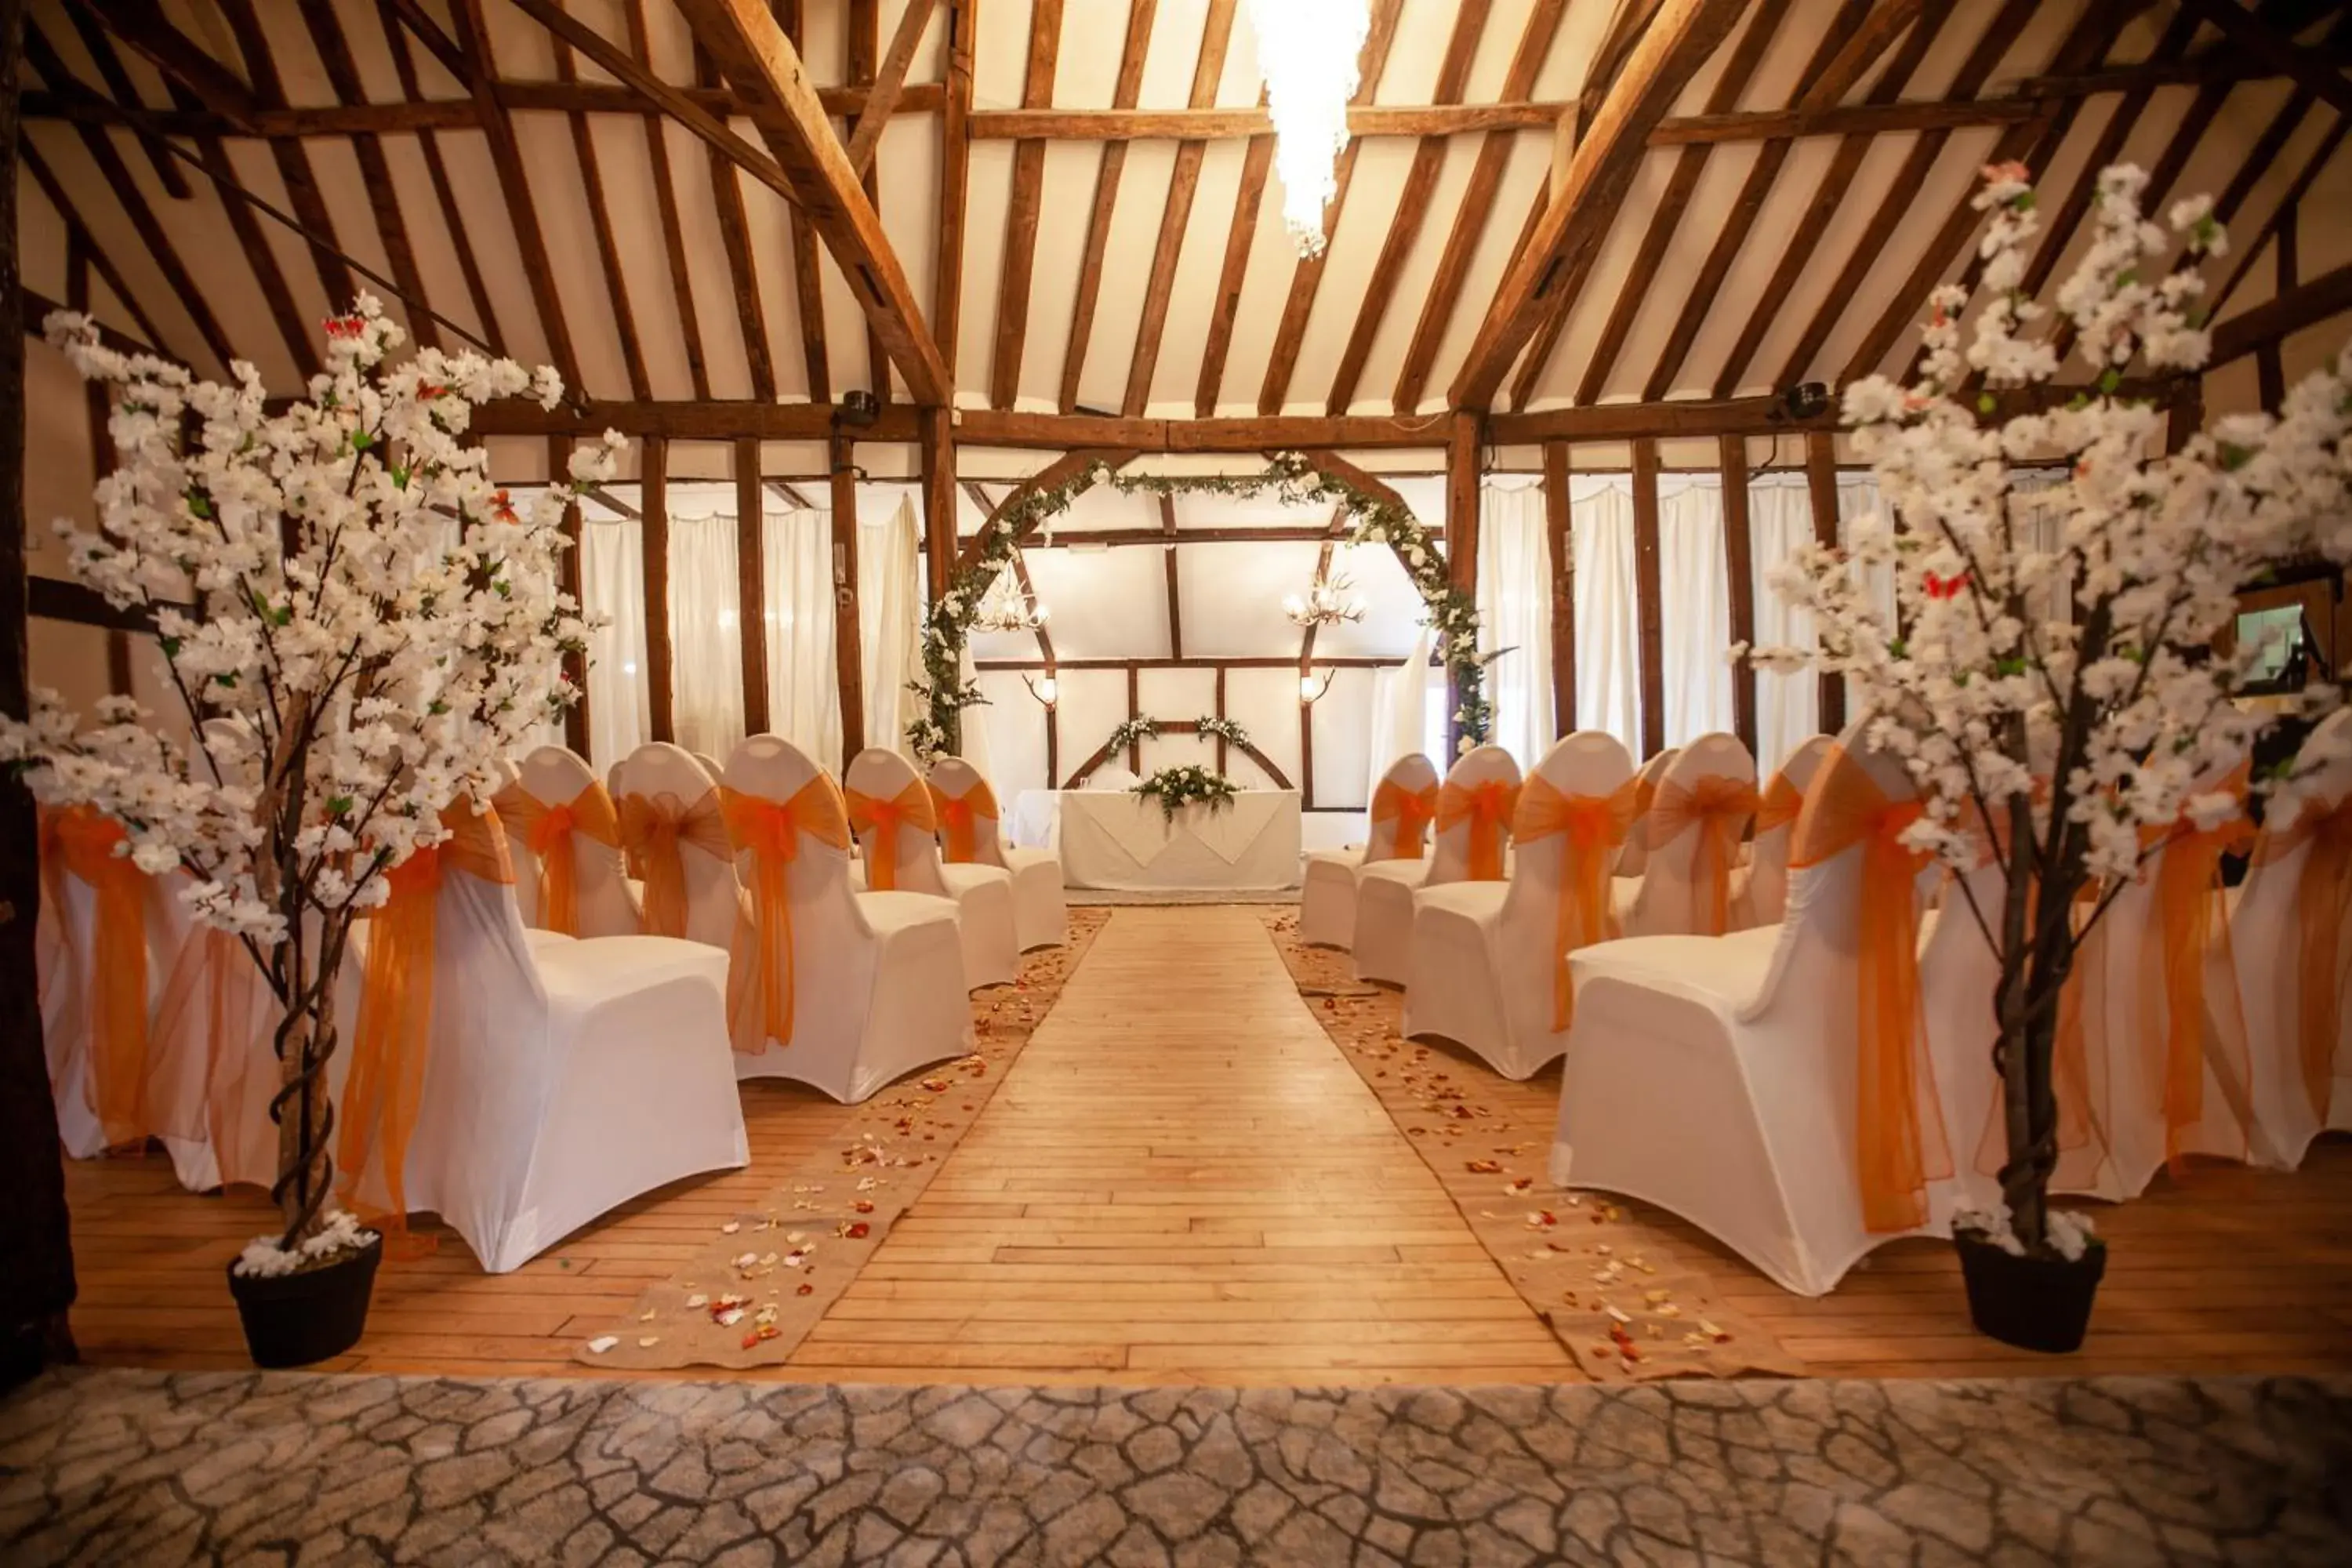 Banquet/Function facilities, Banquet Facilities in Best Western Brome Grange Hotel